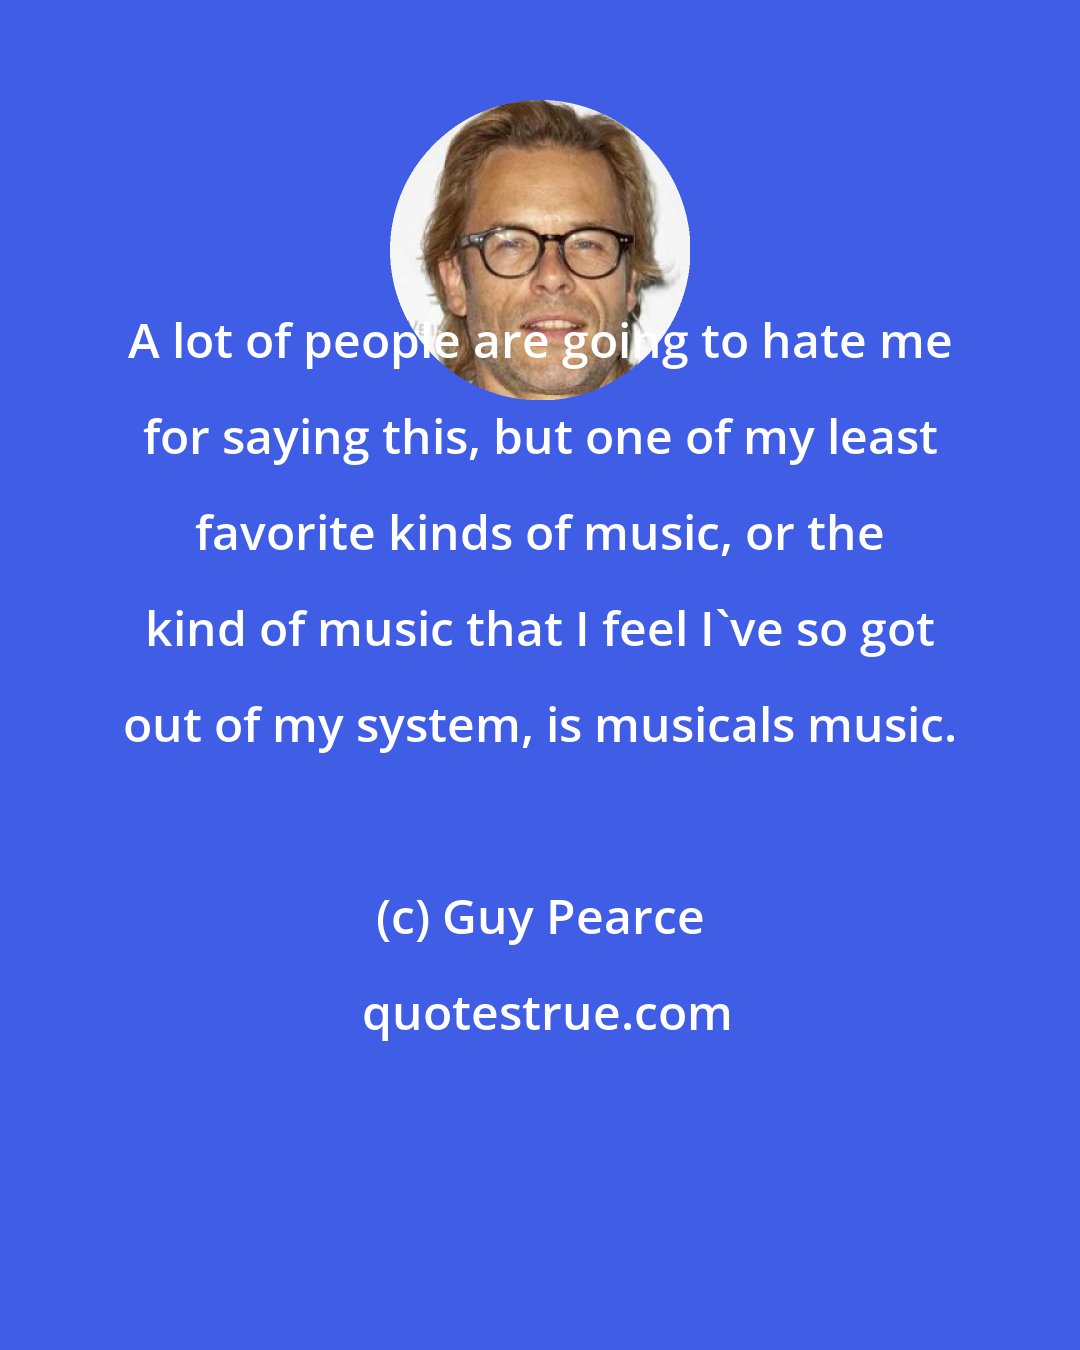 Guy Pearce: A lot of people are going to hate me for saying this, but one of my least favorite kinds of music, or the kind of music that I feel I've so got out of my system, is musicals music.